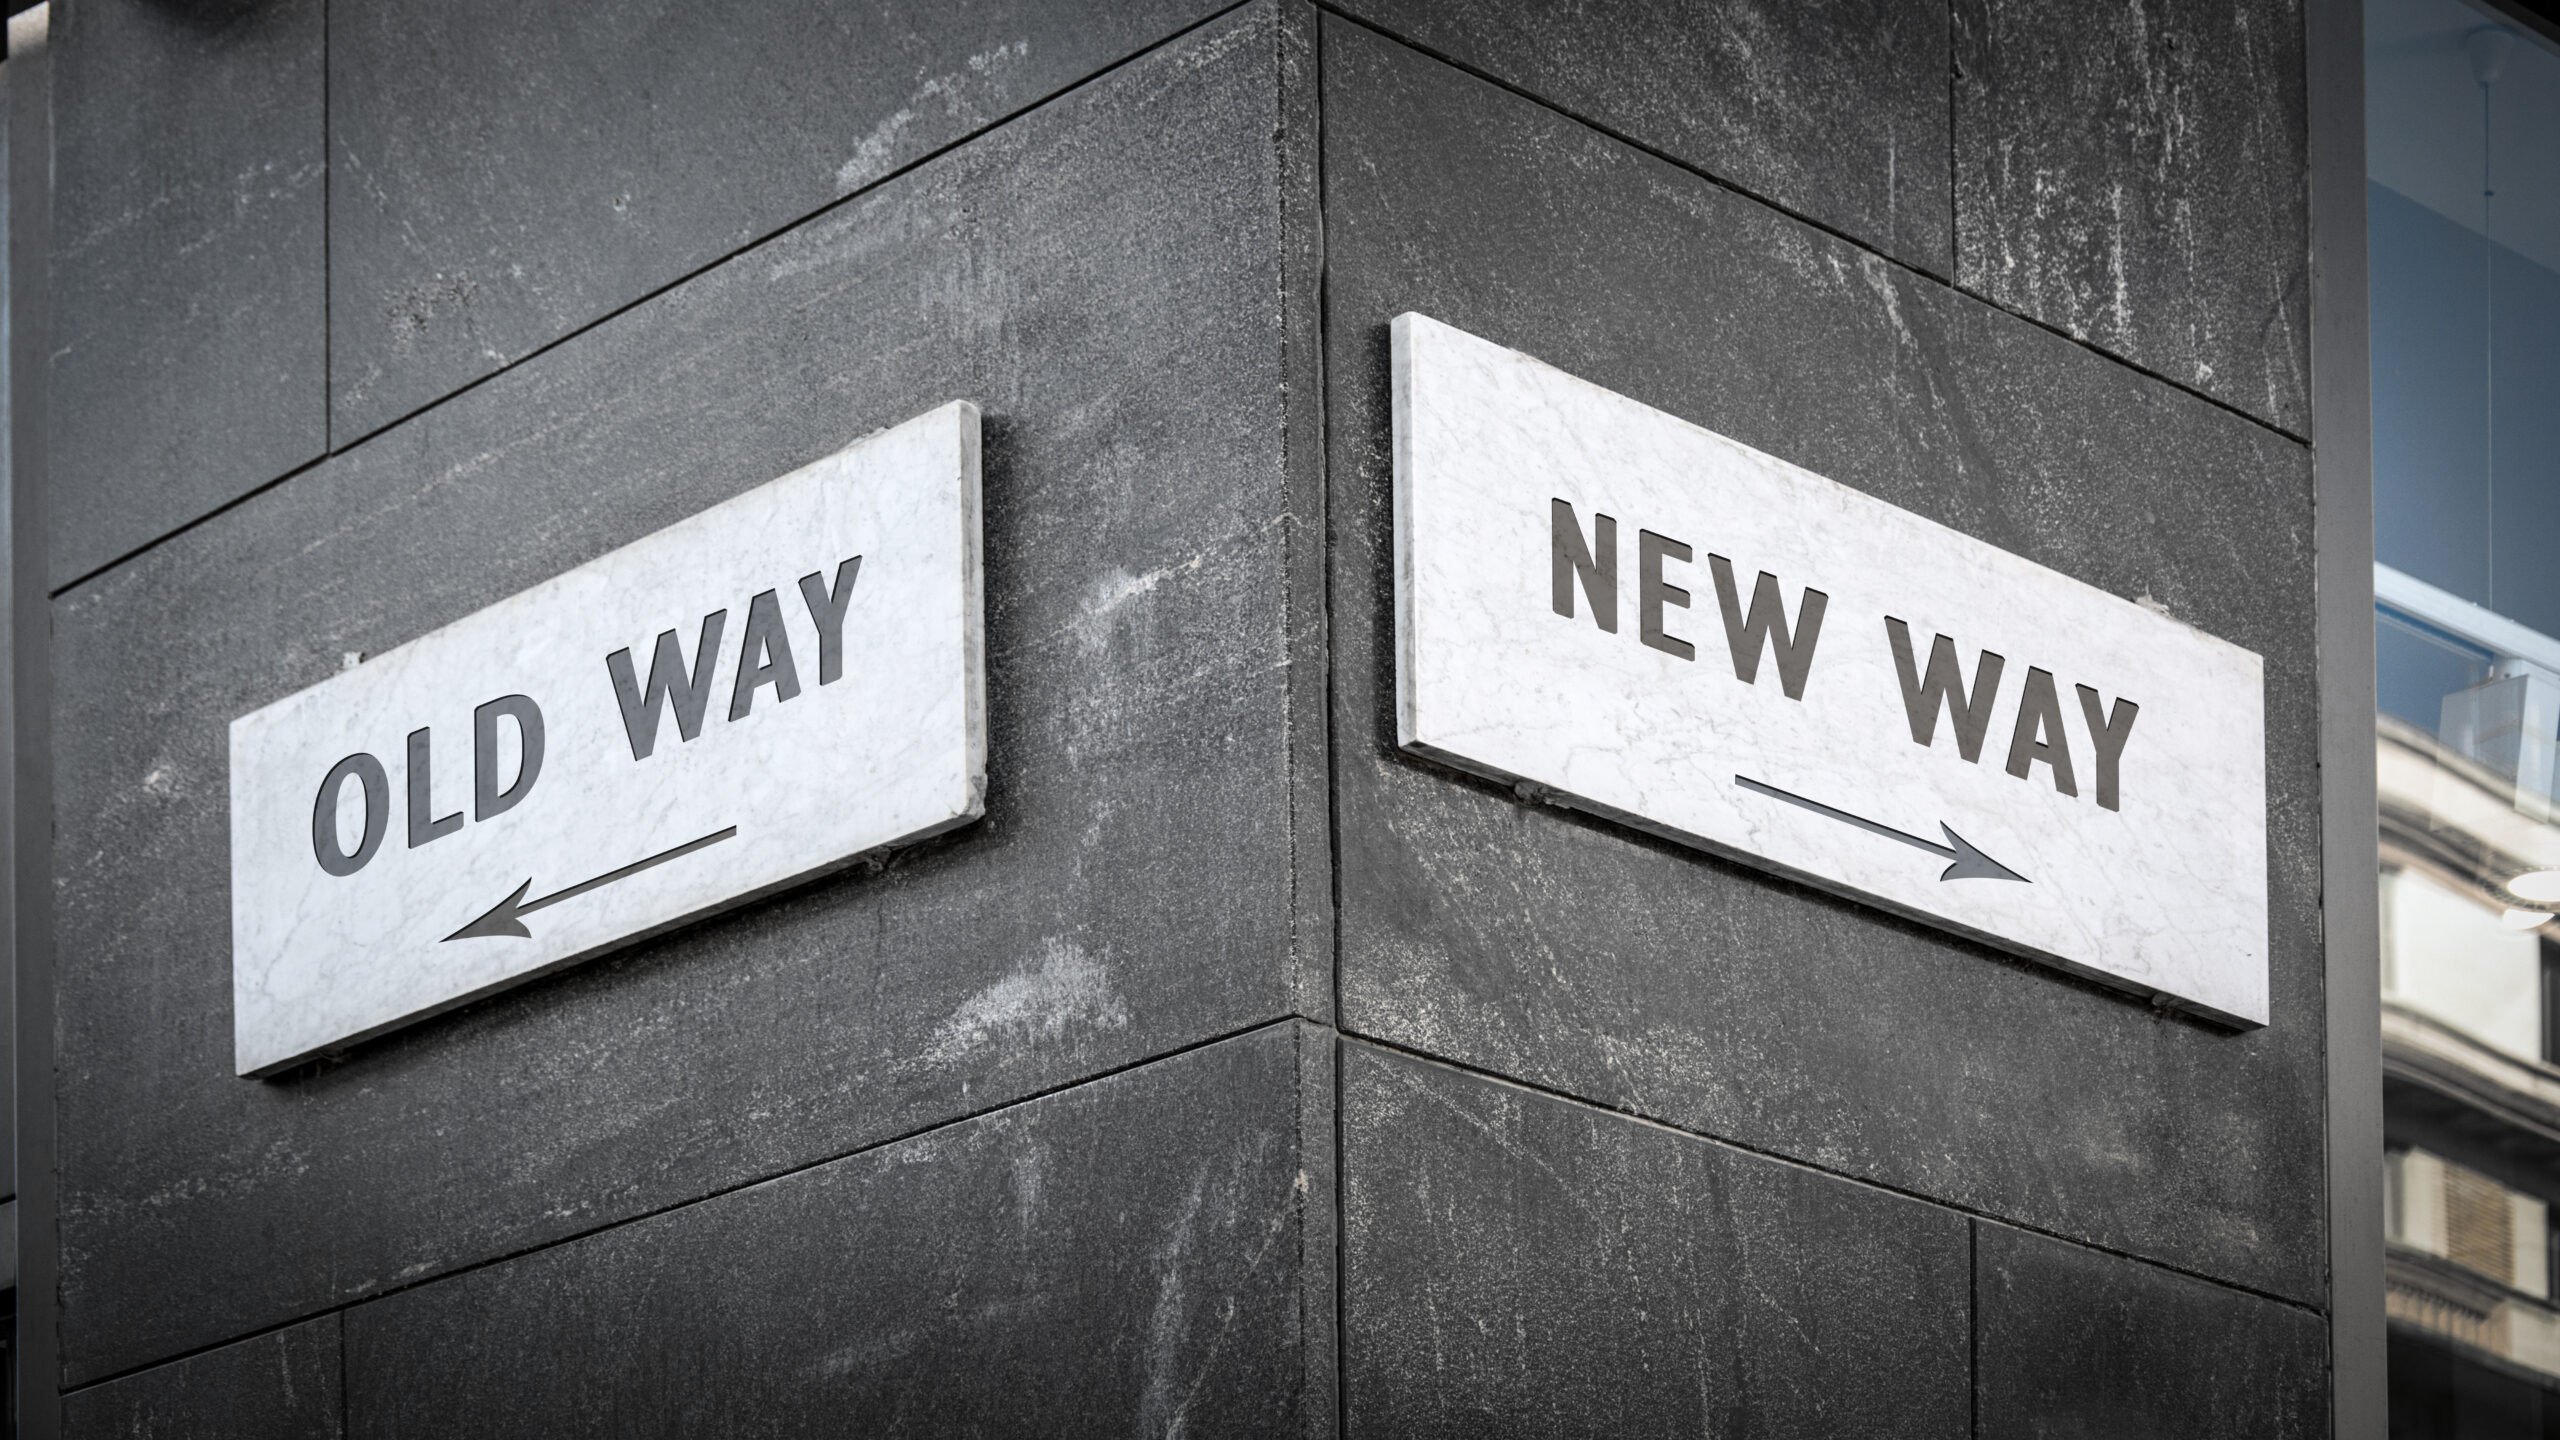 Image showing two road signs. One shows "new way". The other shows "old way"